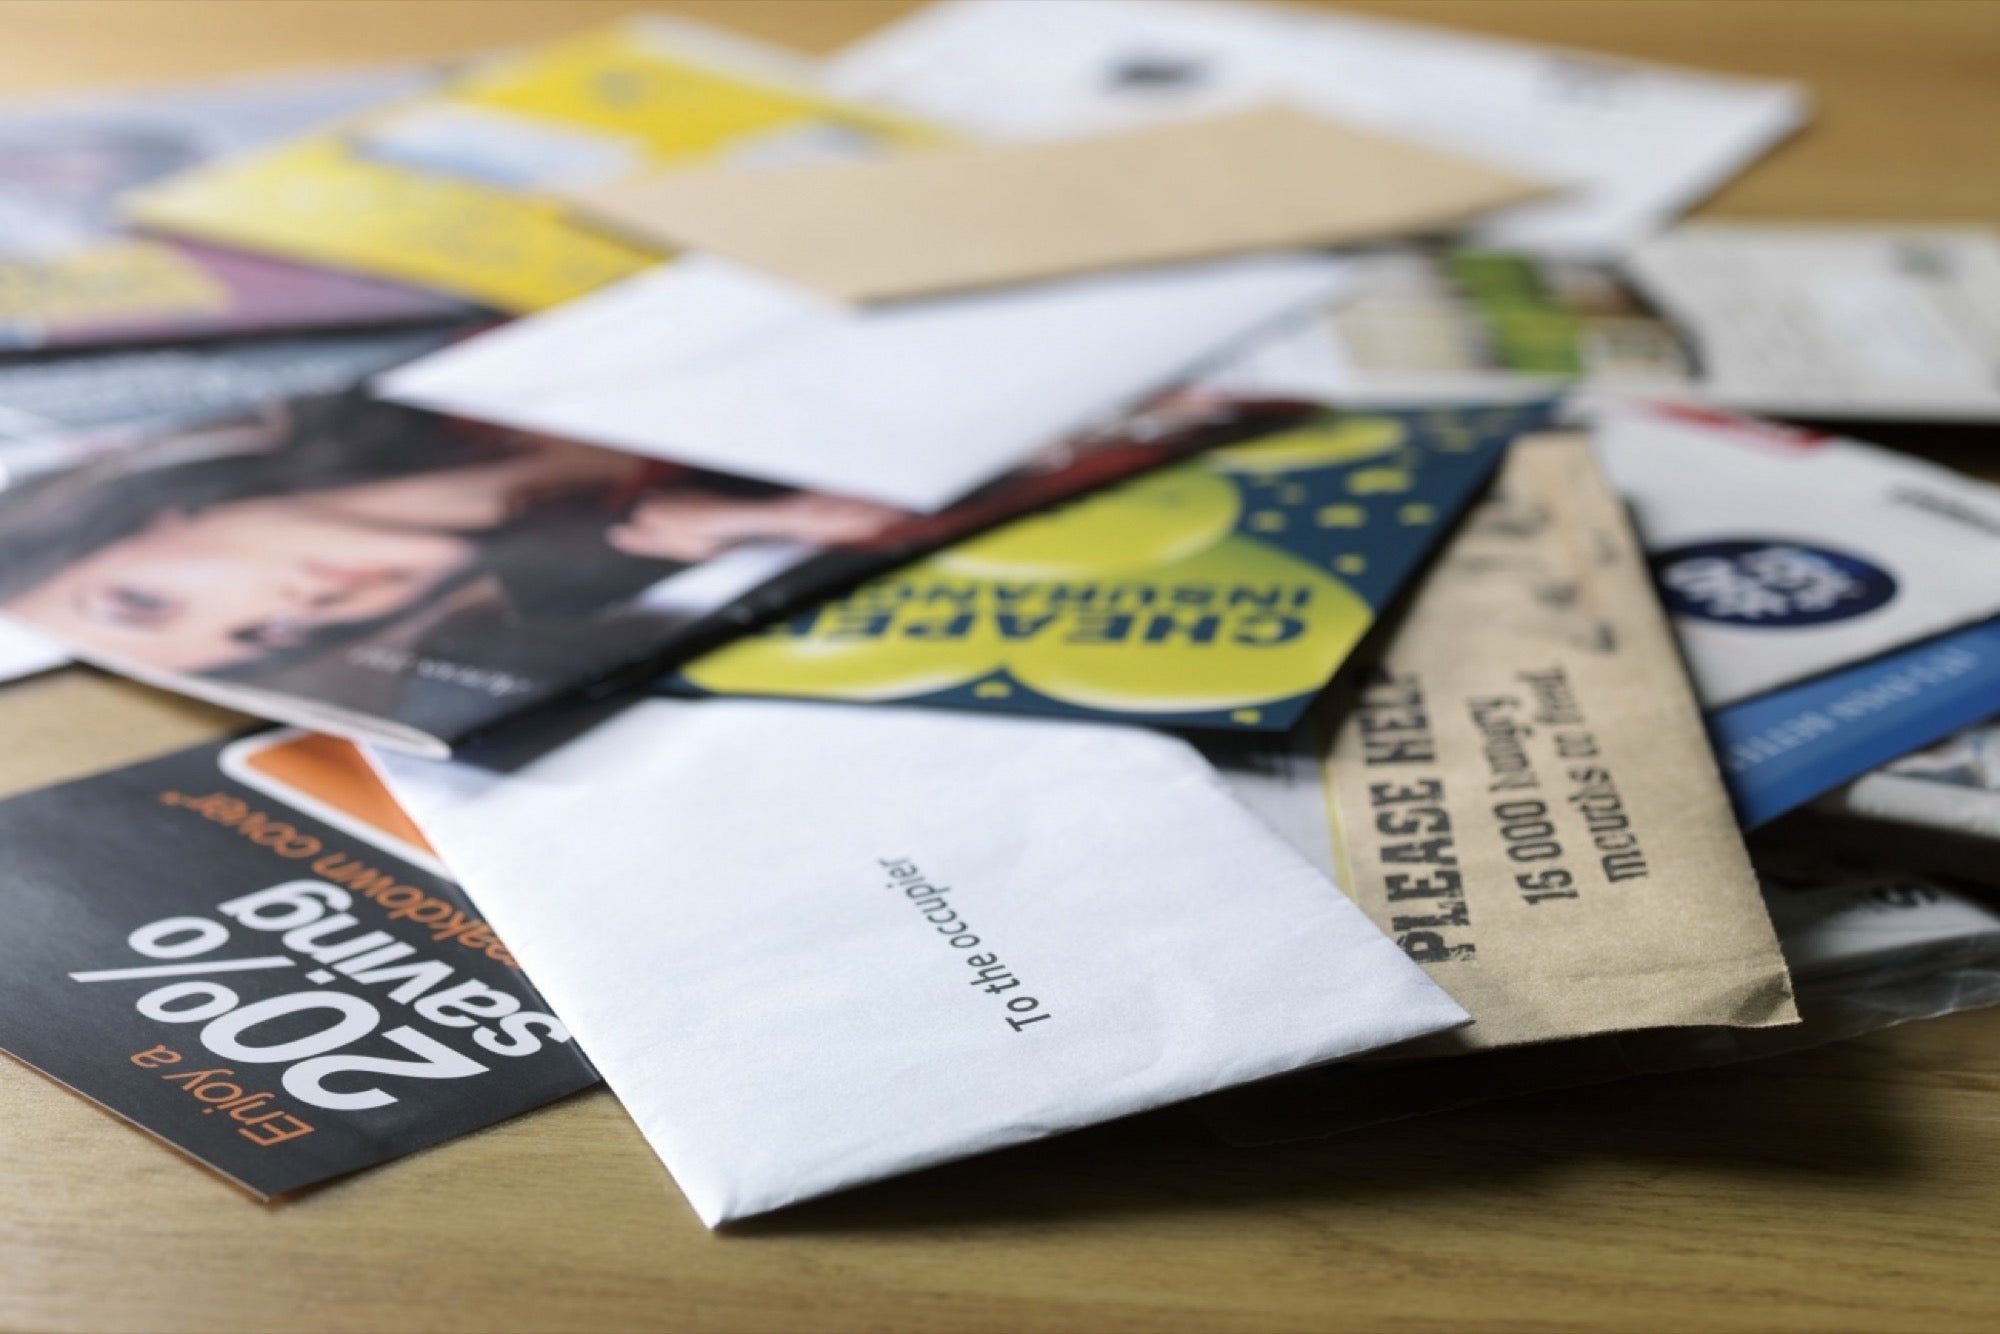 direct mail services in Evanston, IL